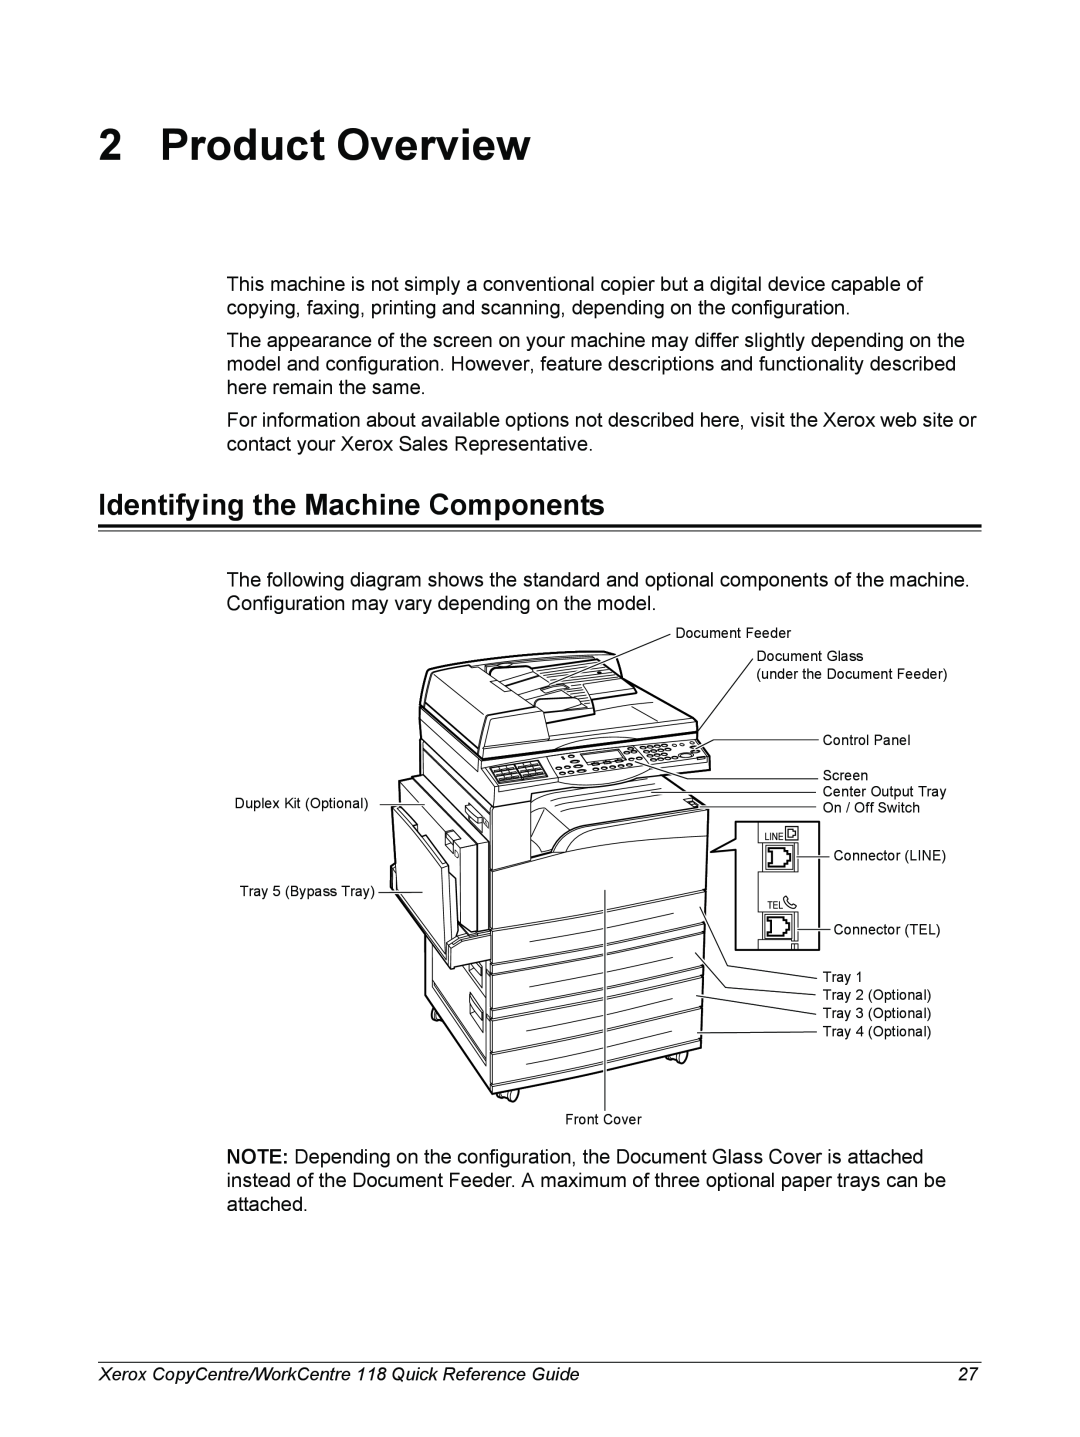 Xerox C118, M118i manual Product Overview, Identifying the Machine Components 